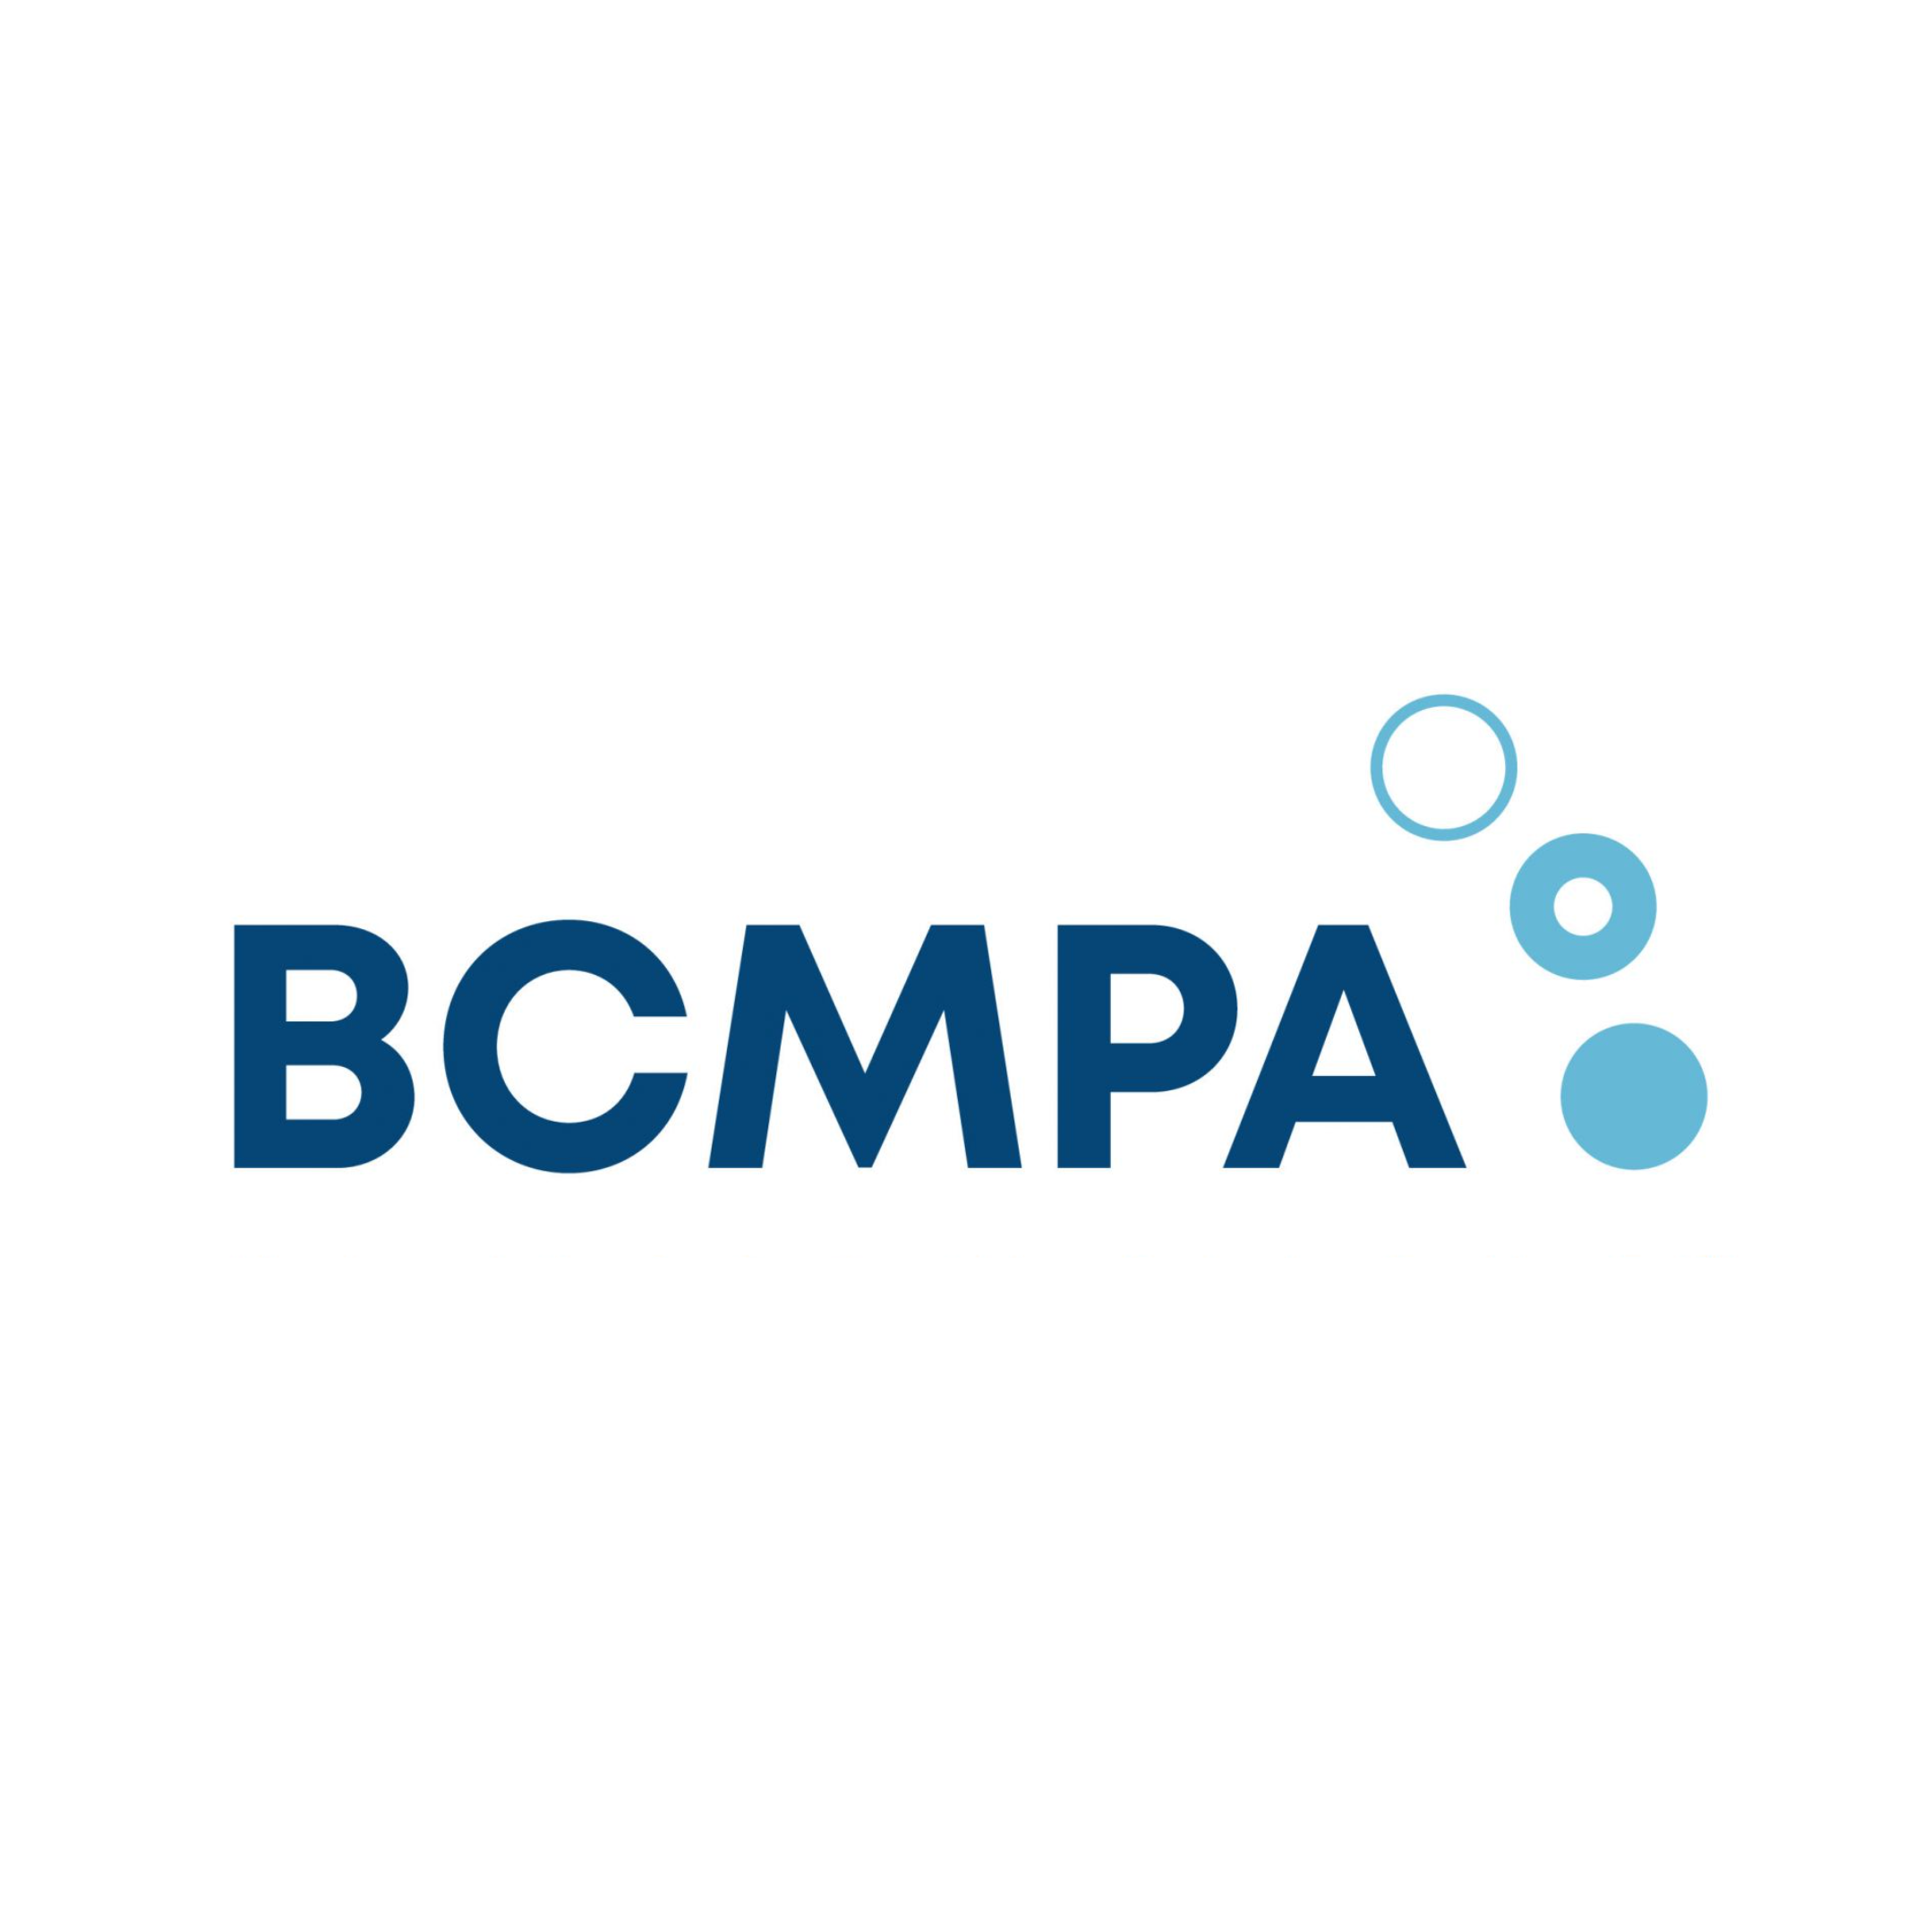 BCMPA - The Association for Contract Manufacturing, Packing, Fulfilment & Logistics